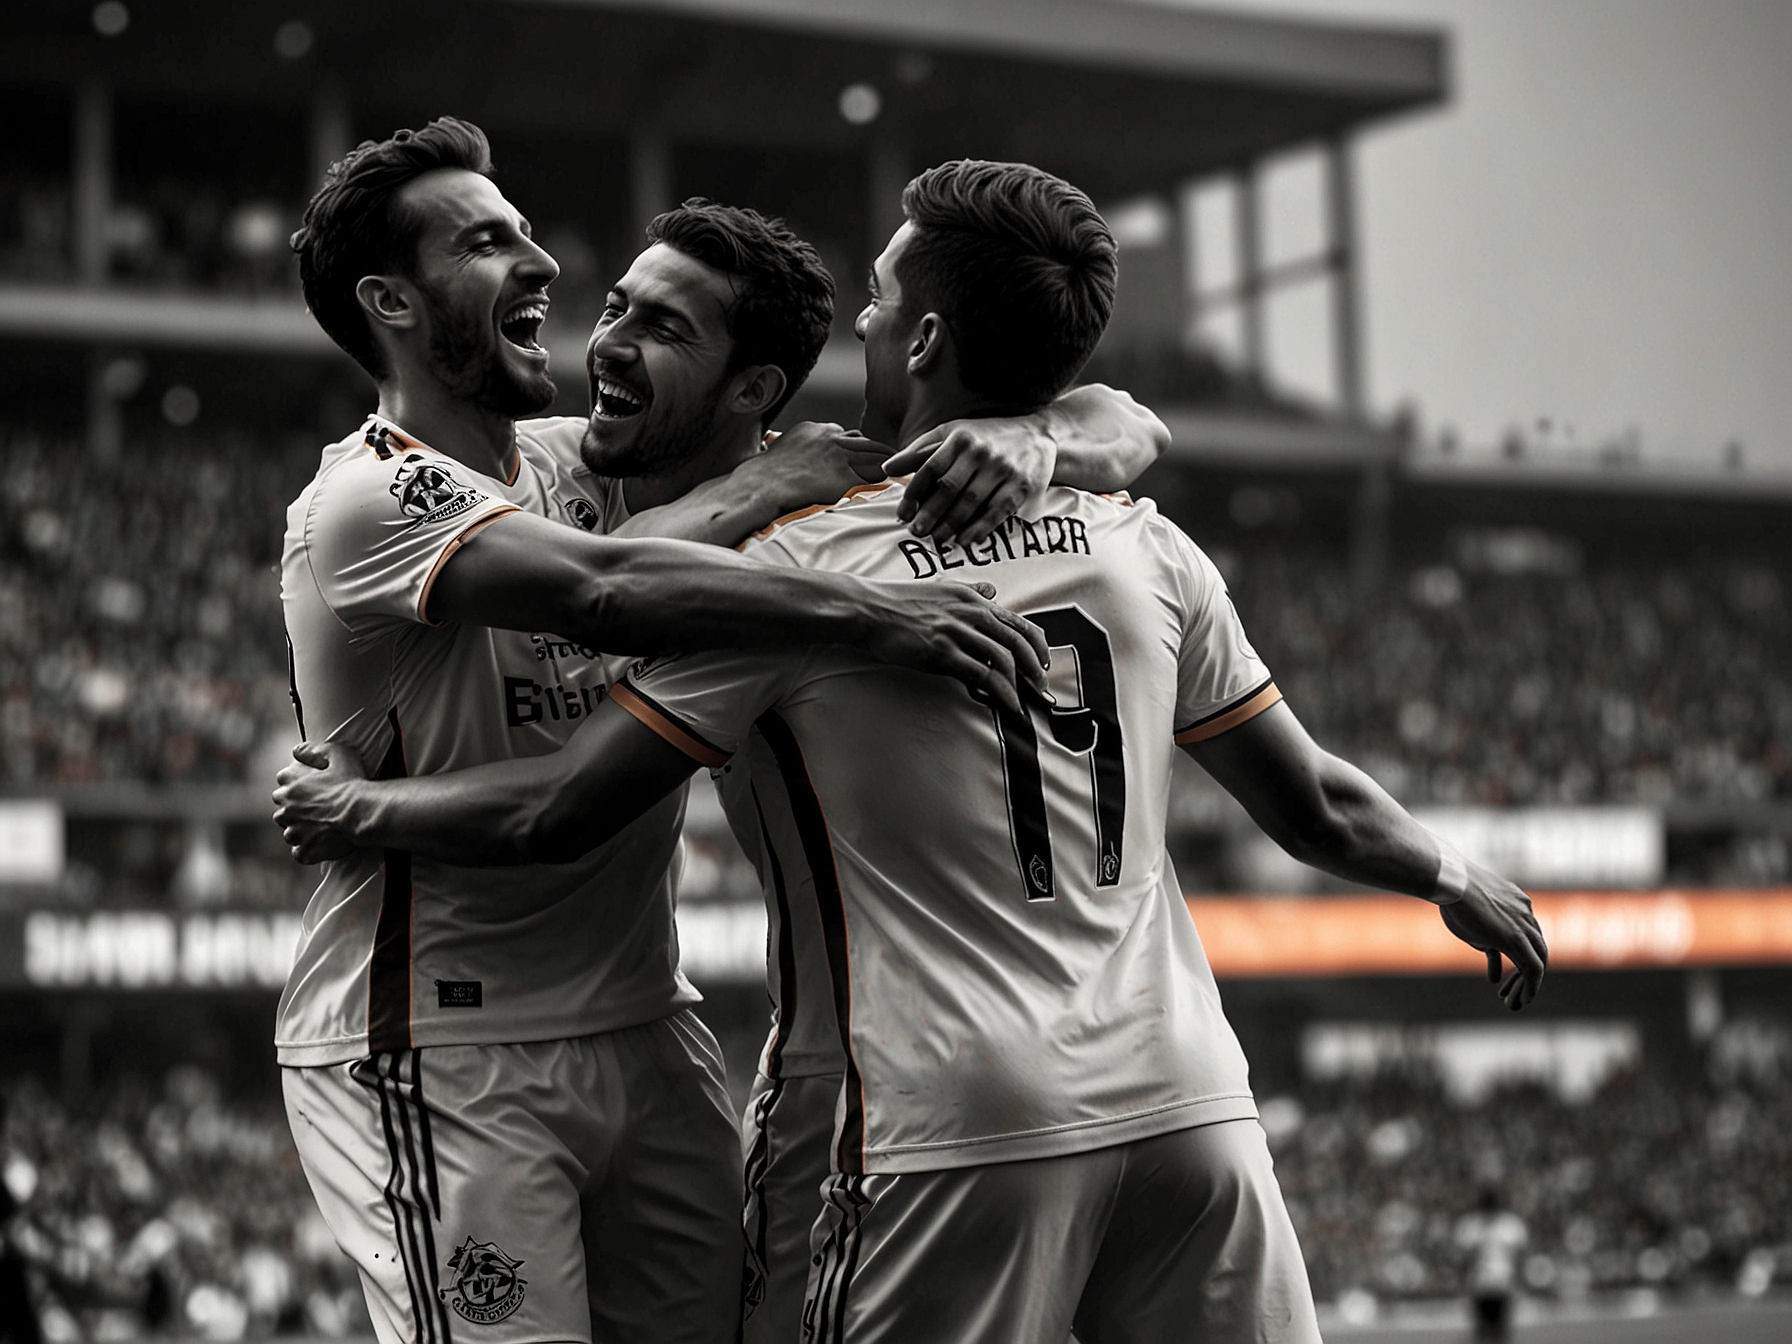 Houston Dynamo's Sebastián Ferreira celebrating with teammates after scoring a goal, demonstrating the team's dynamic attack and dominance in the match against D.C. United.